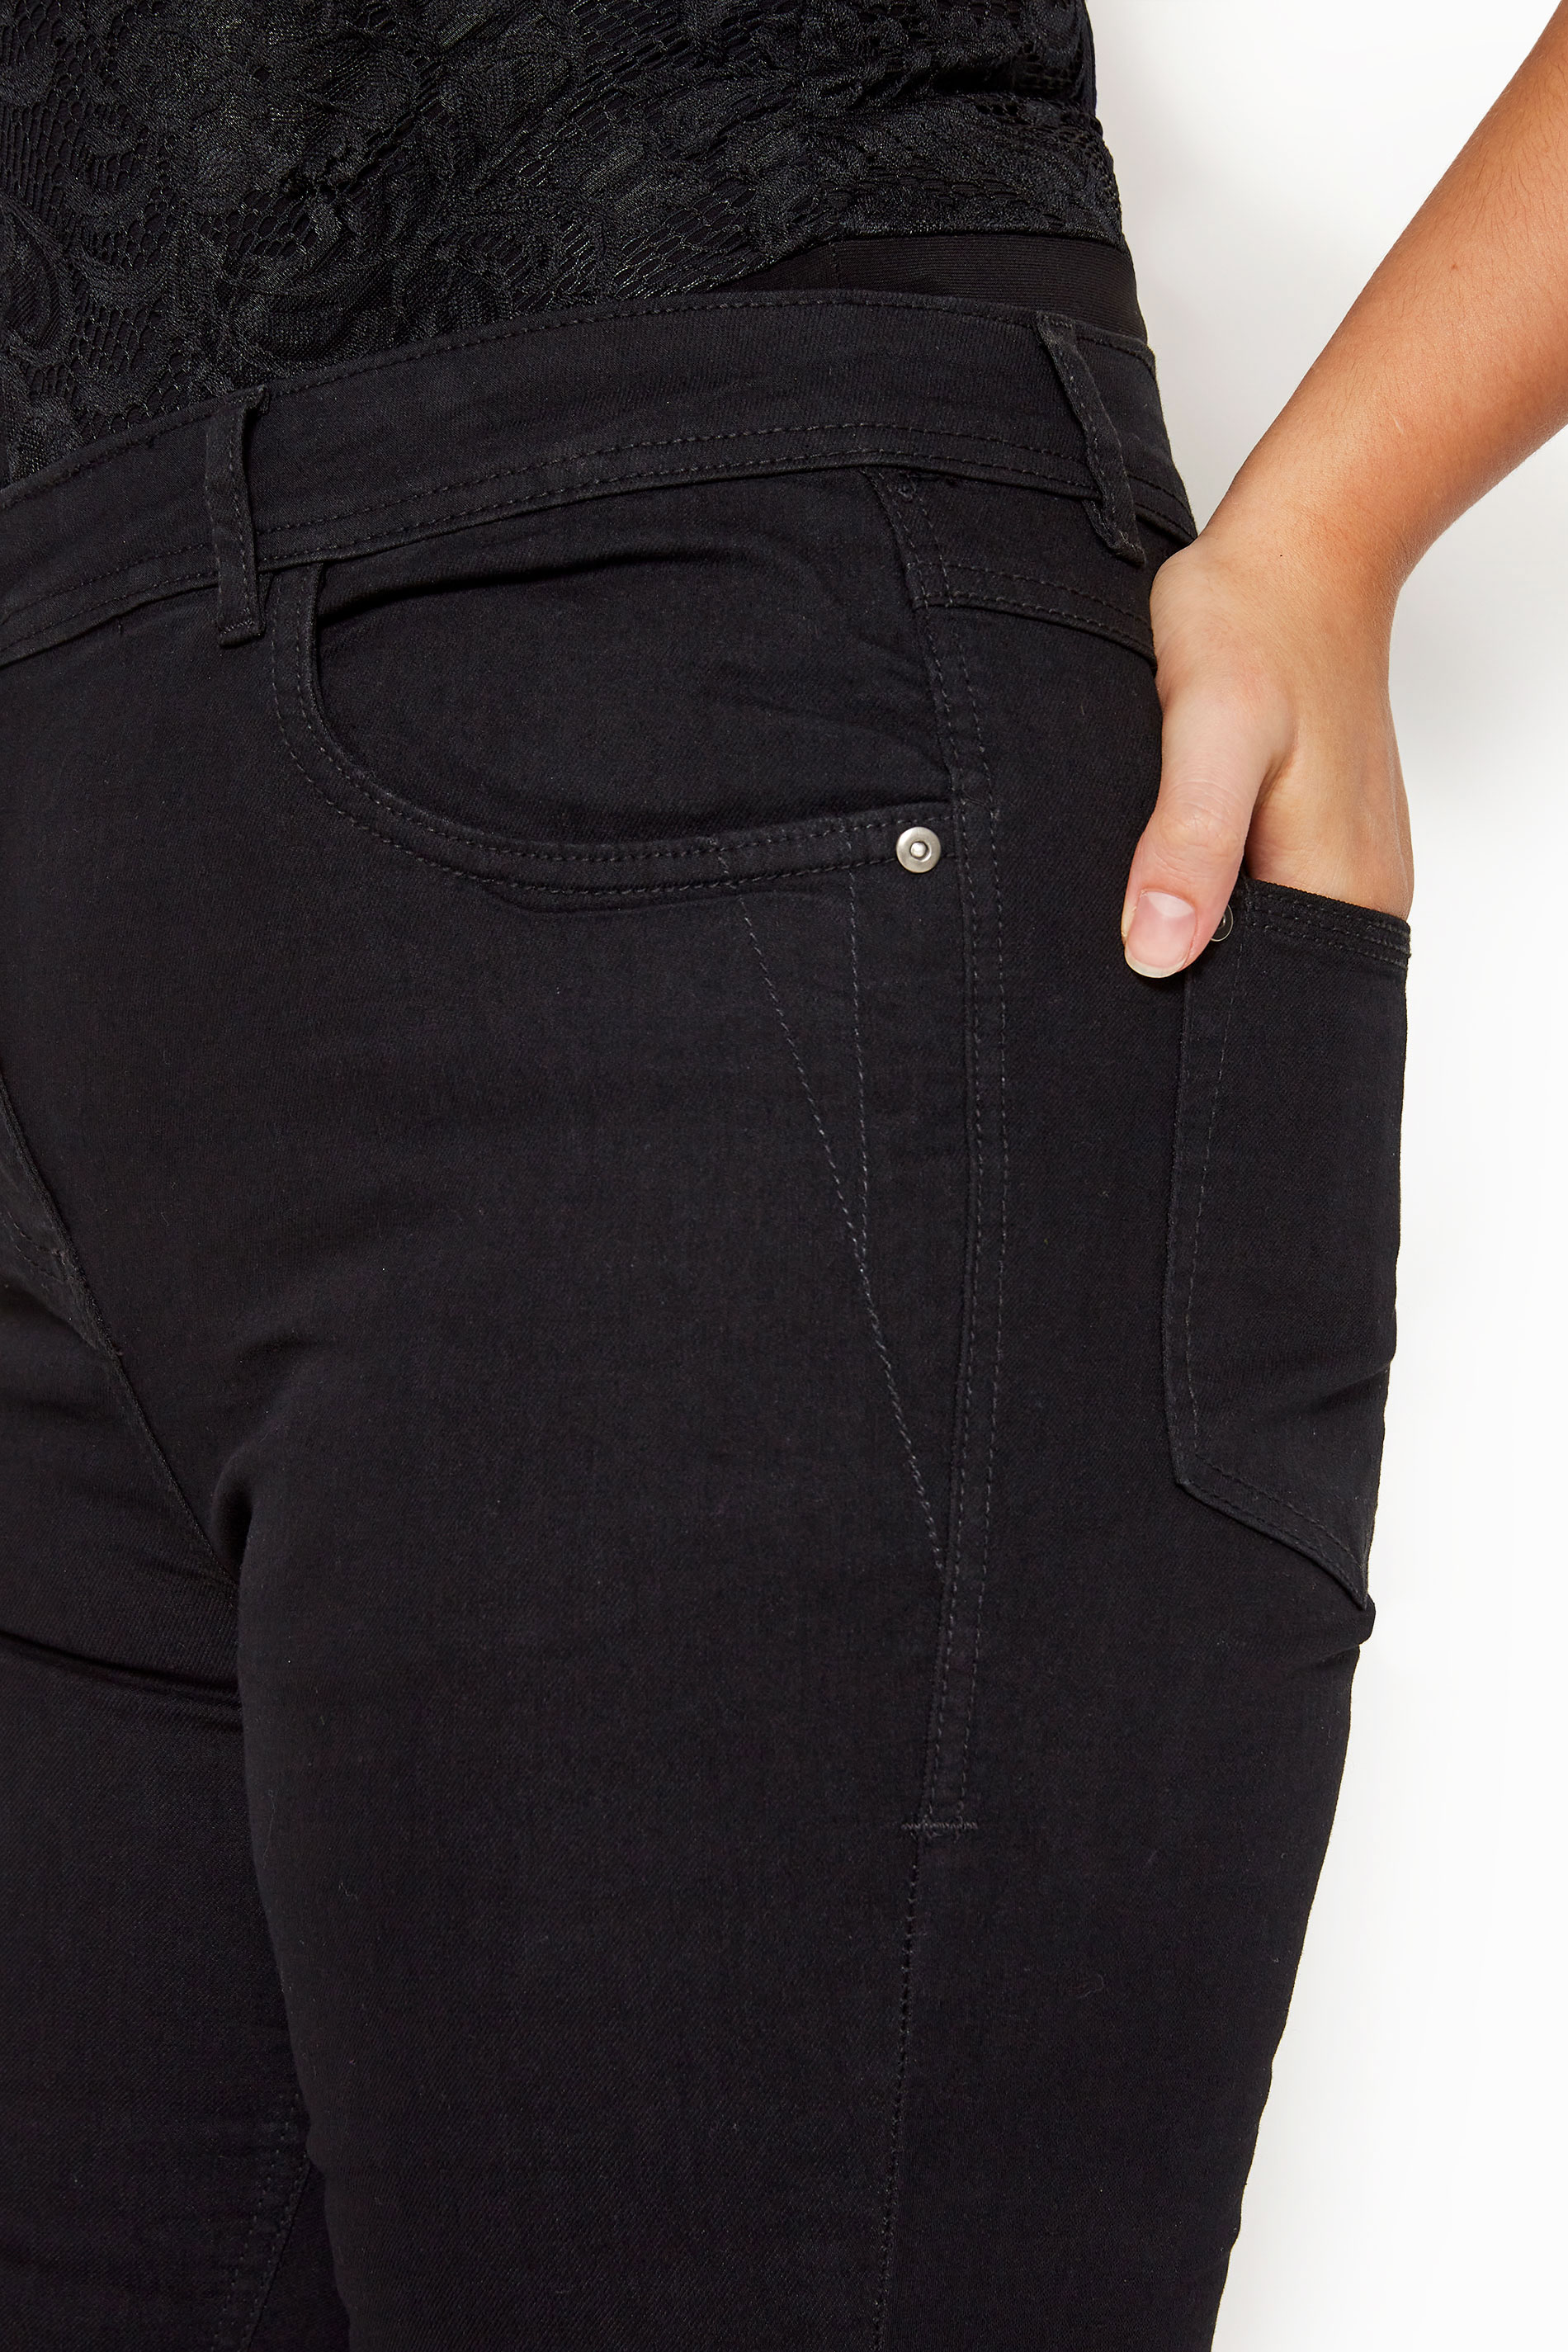 Black Straight Leg RUBY Jeans, Plus size 16 to 36 3